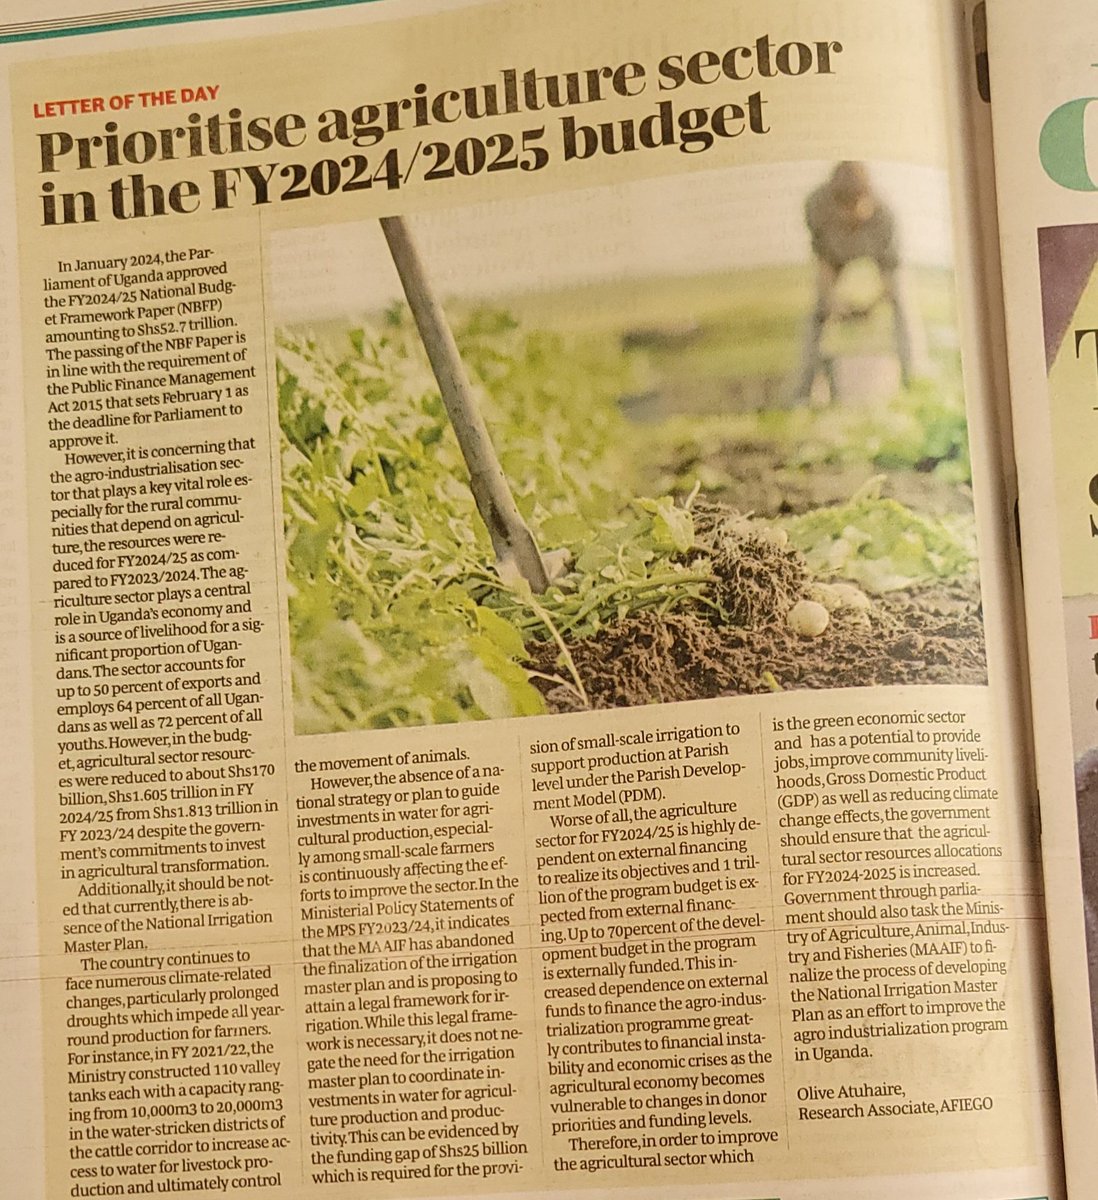 Uganda heavily relies on the agricultural sector and 70% of this program budget for FY2024/25 is expected to come from outside sources. Where does this leave us as a country when donor priorities and funding levels change?